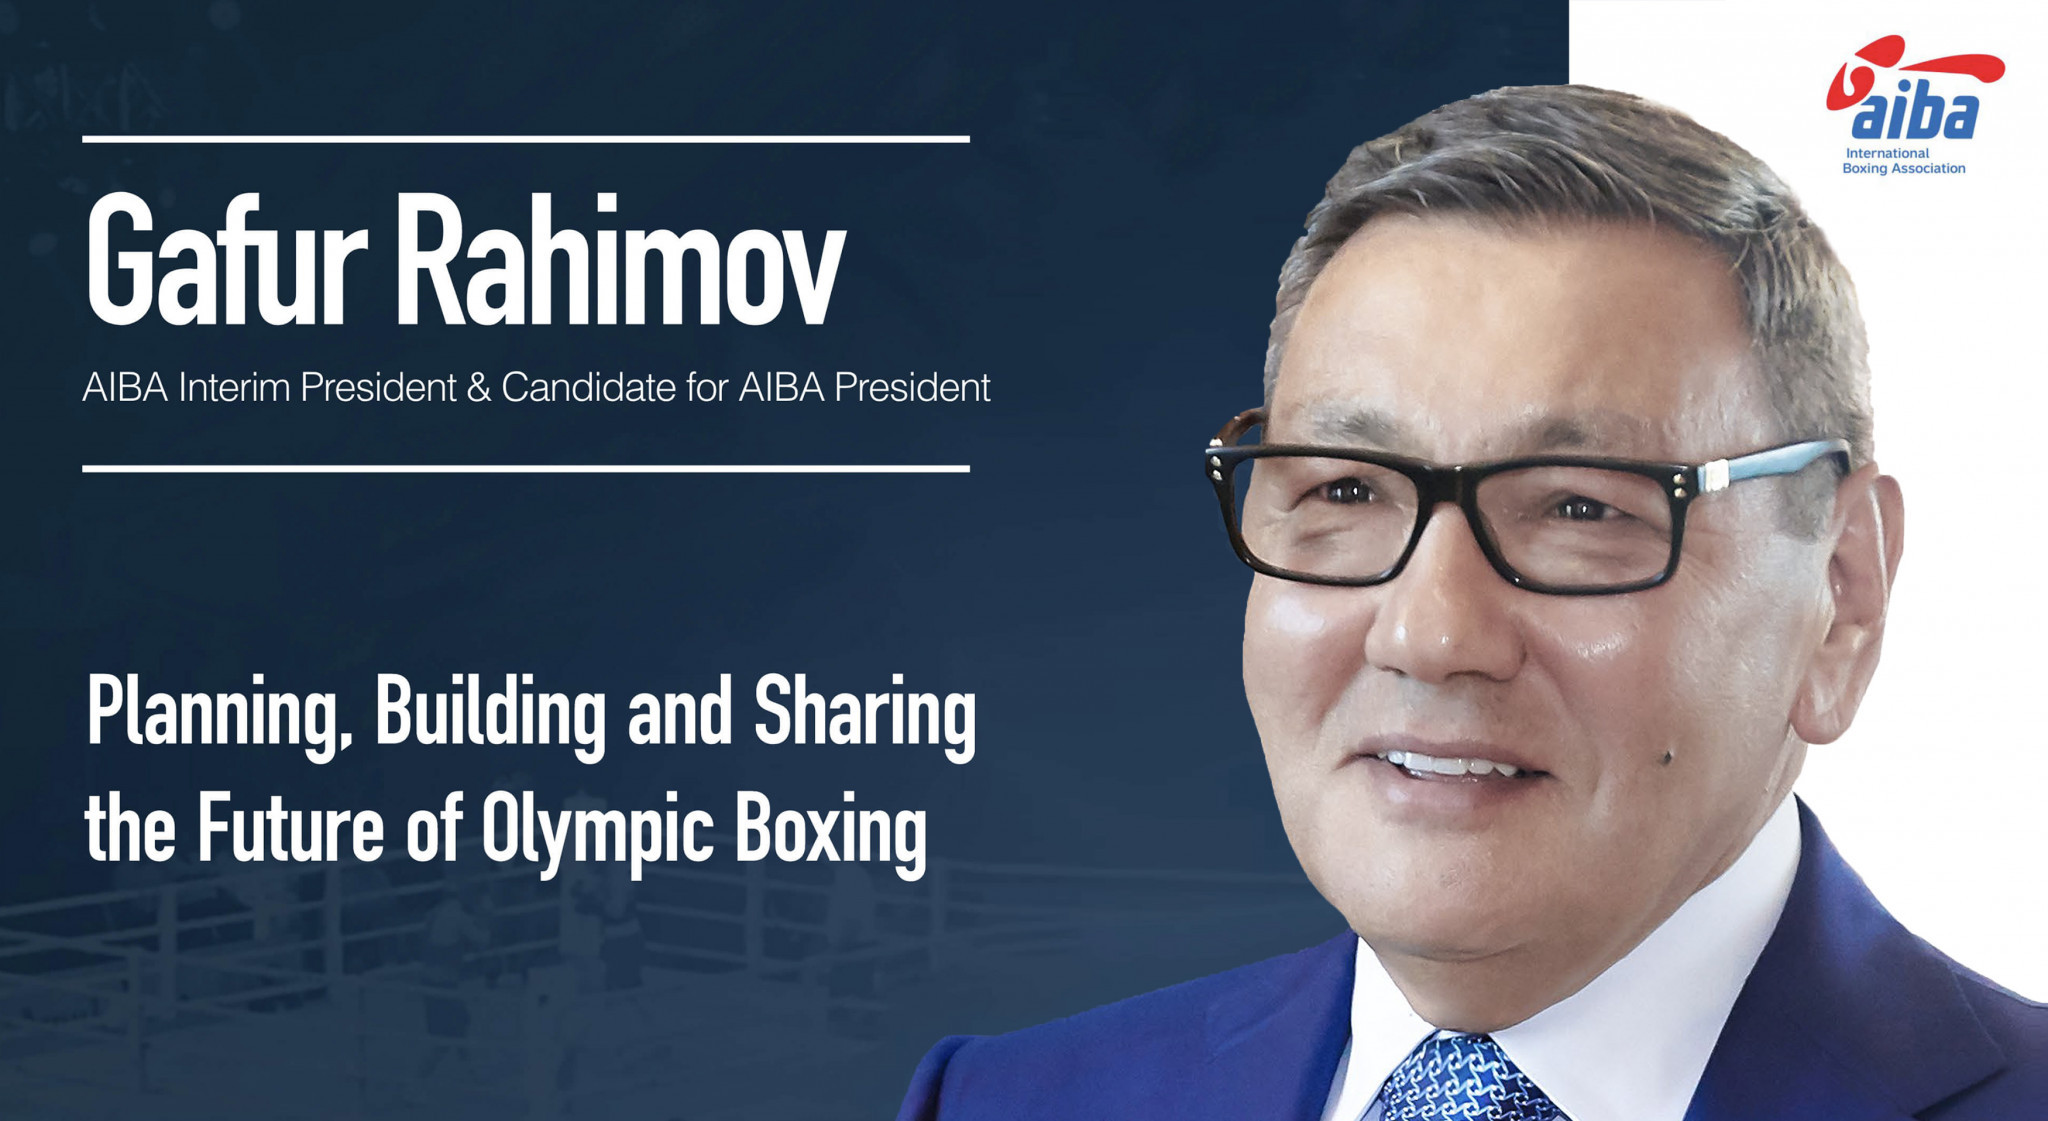 Rakhimov promises to "personally lead" development of AIBA governance if elected President as admits strained relations with IOC